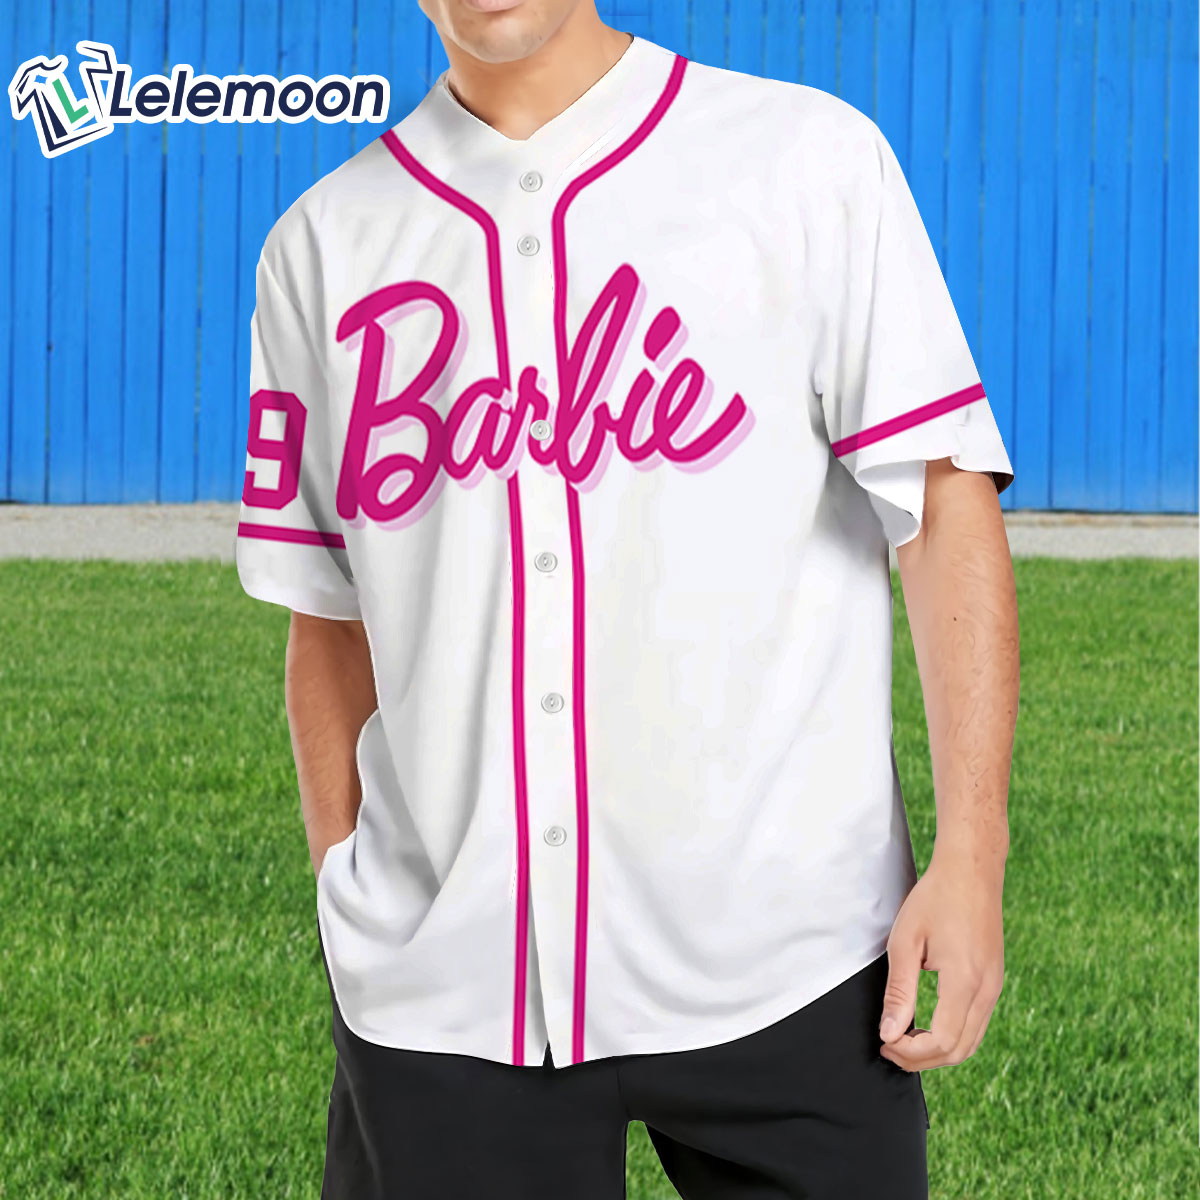 Barbie Come On Let's Go Party Baseball Jersey Shirt - Lelemoon